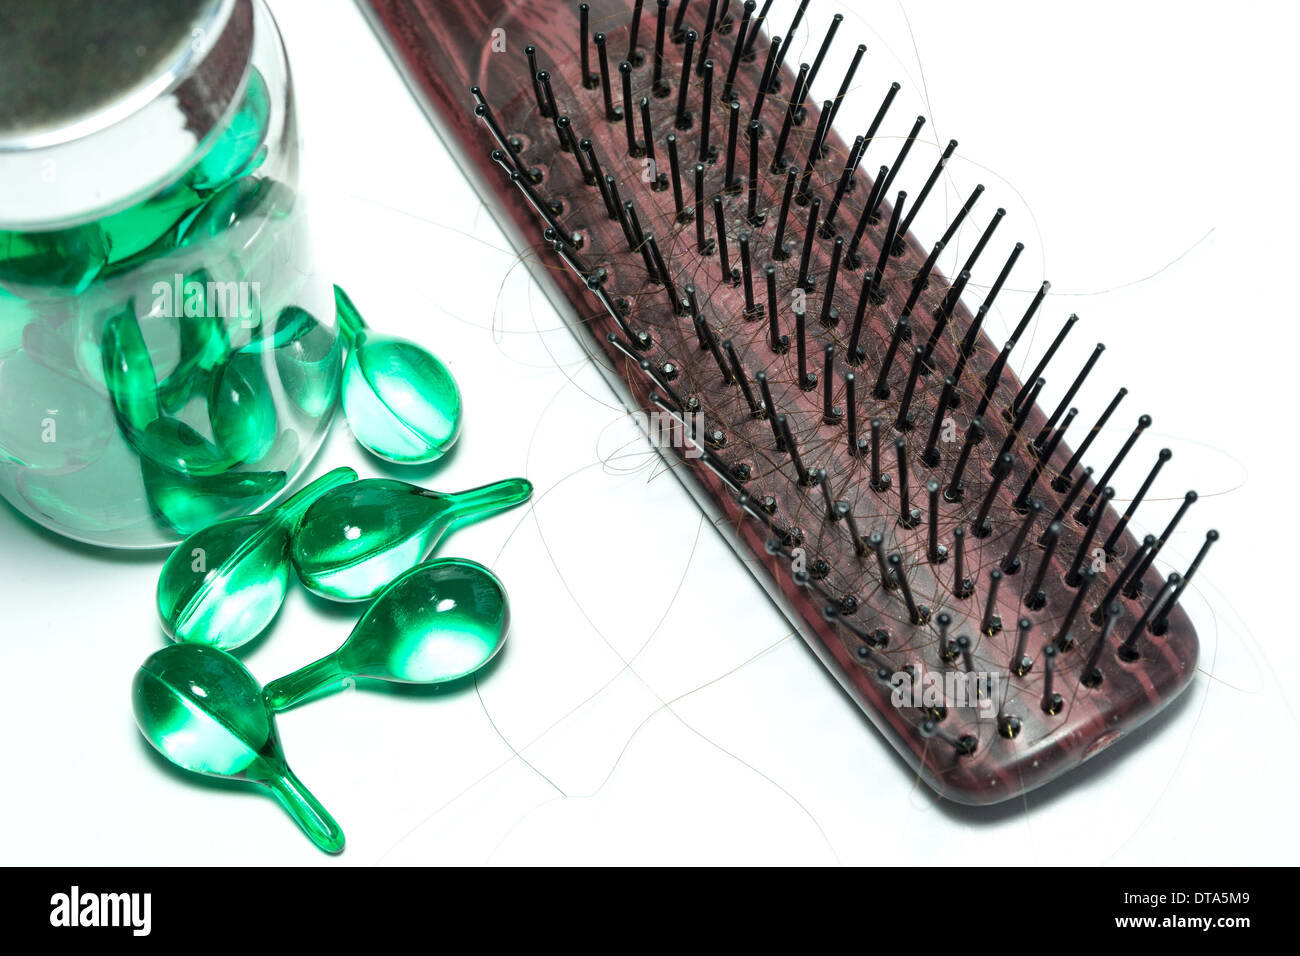 hair vitamins and Hairbrush with Hair Loss on white background Stock Photo